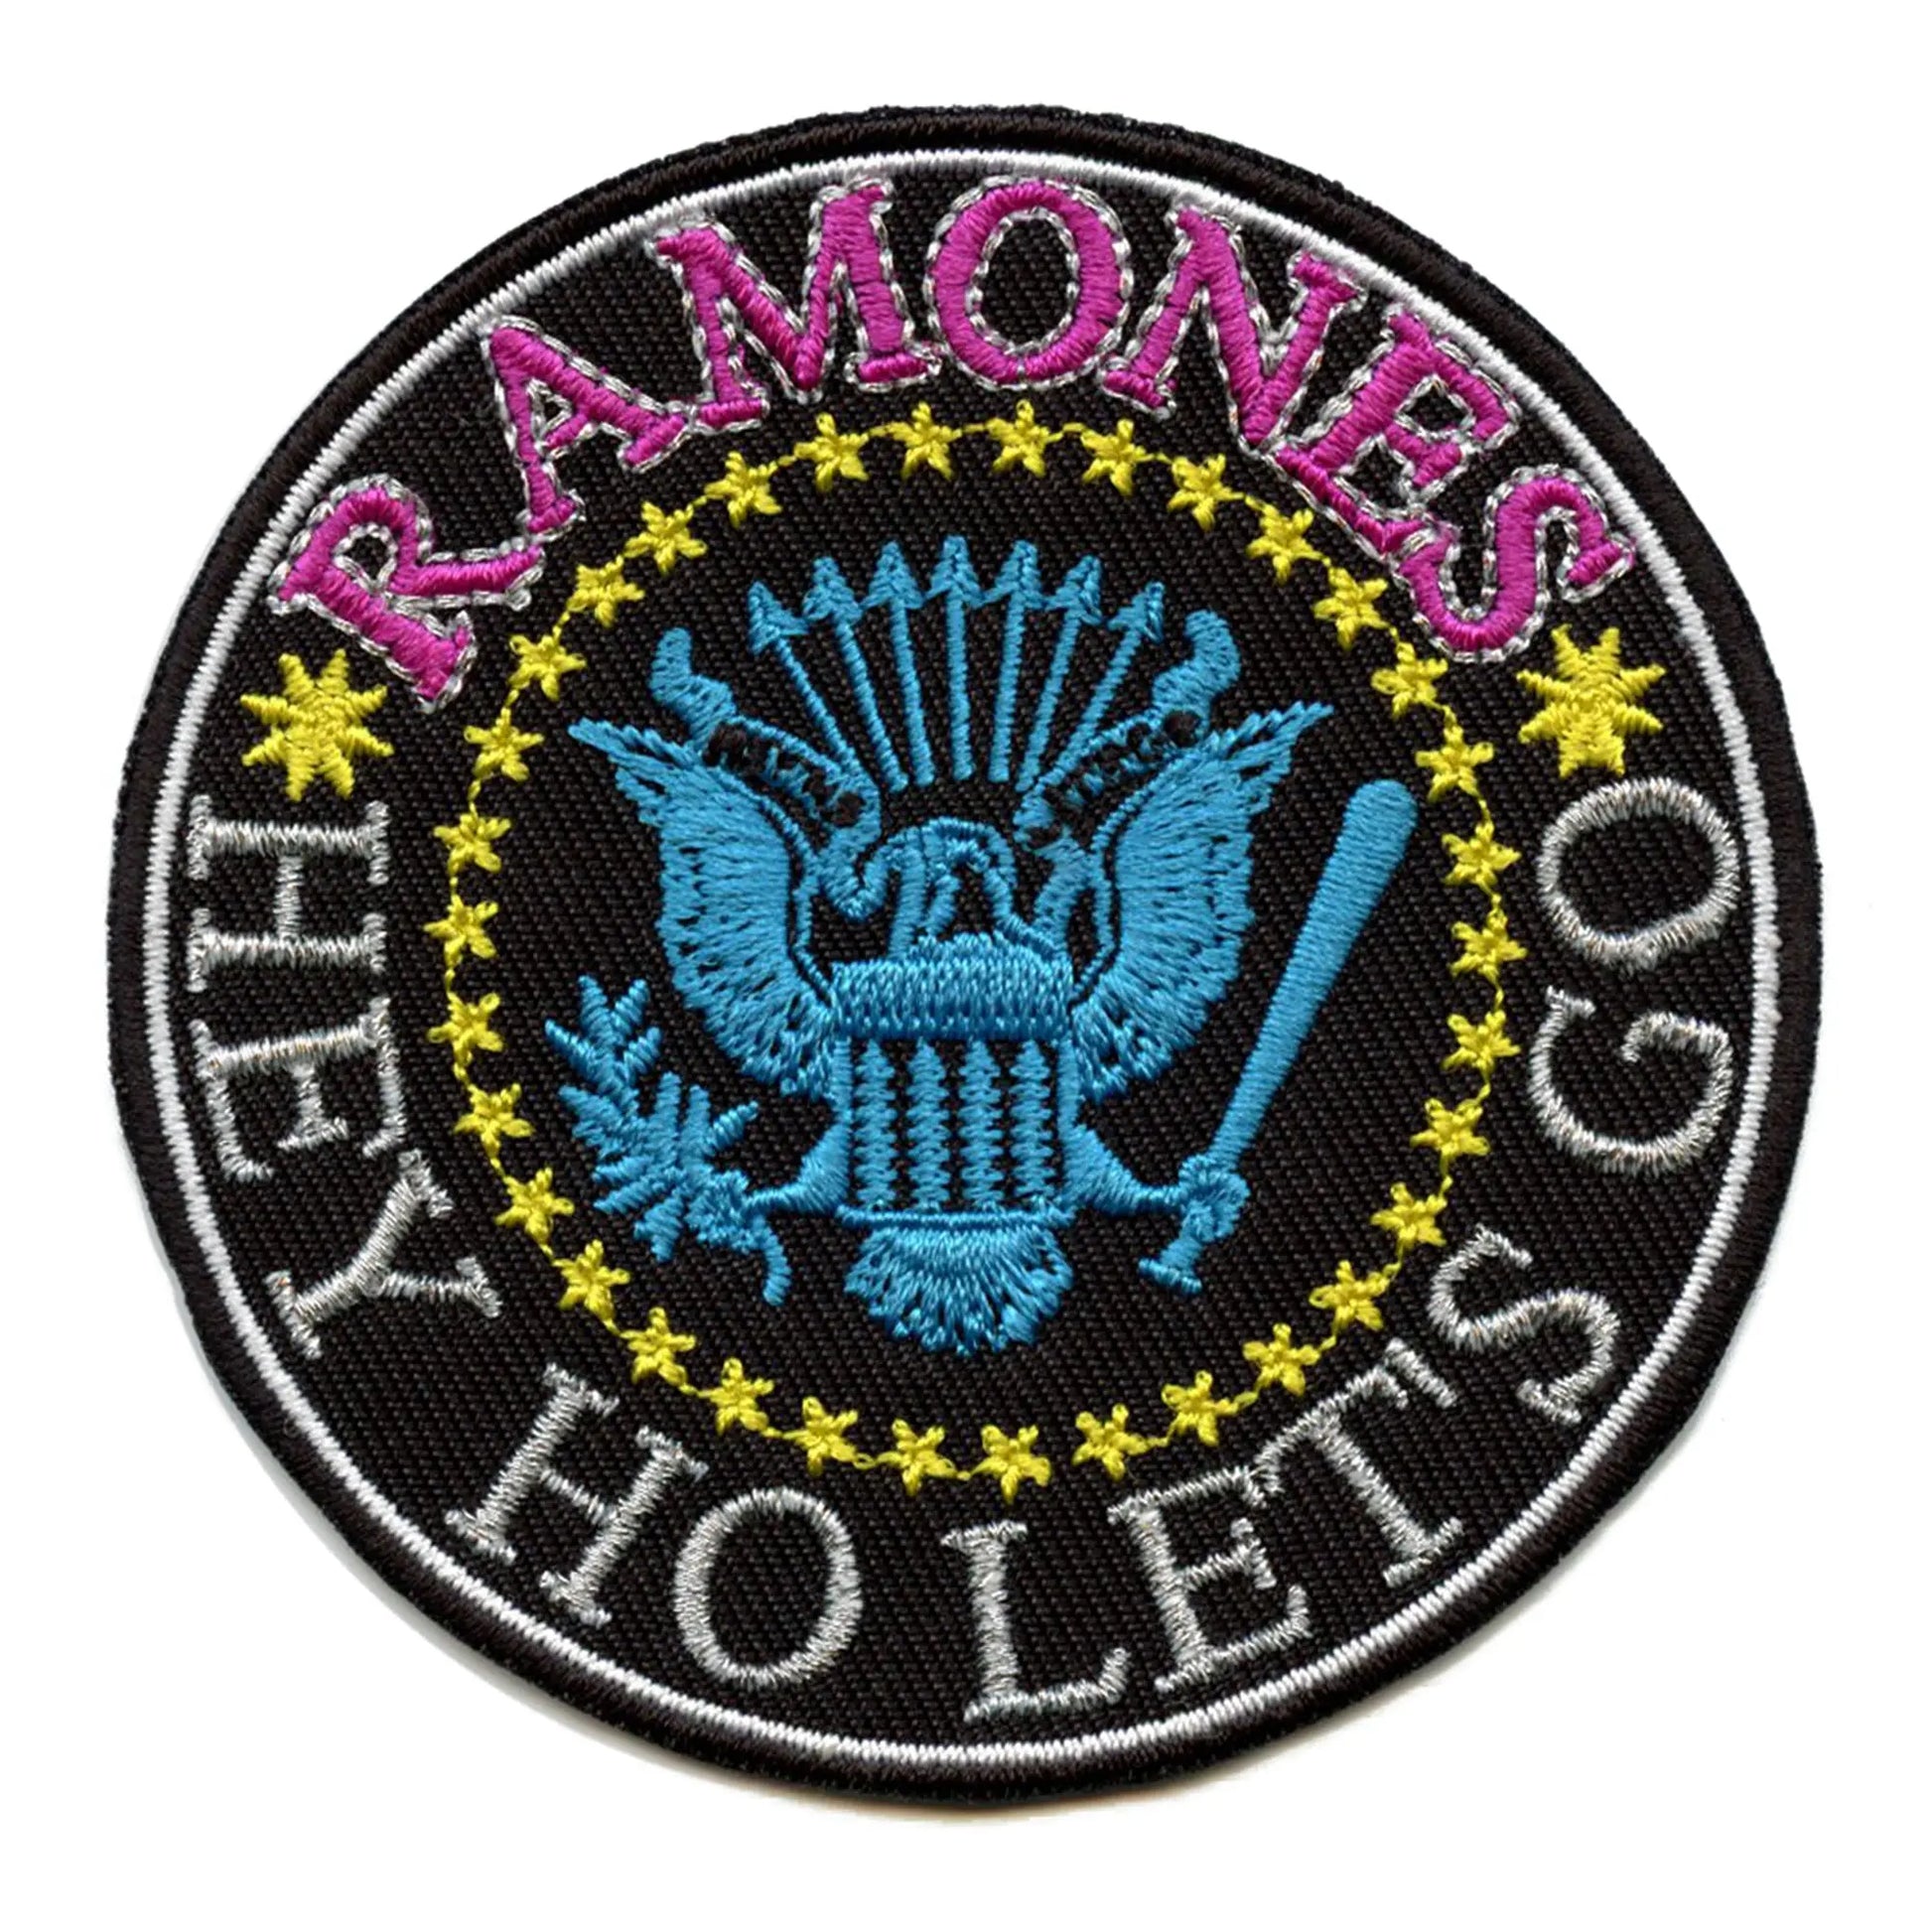 The Ramones Hey Ho Patch Punk Rock Band Embroidered Iron On